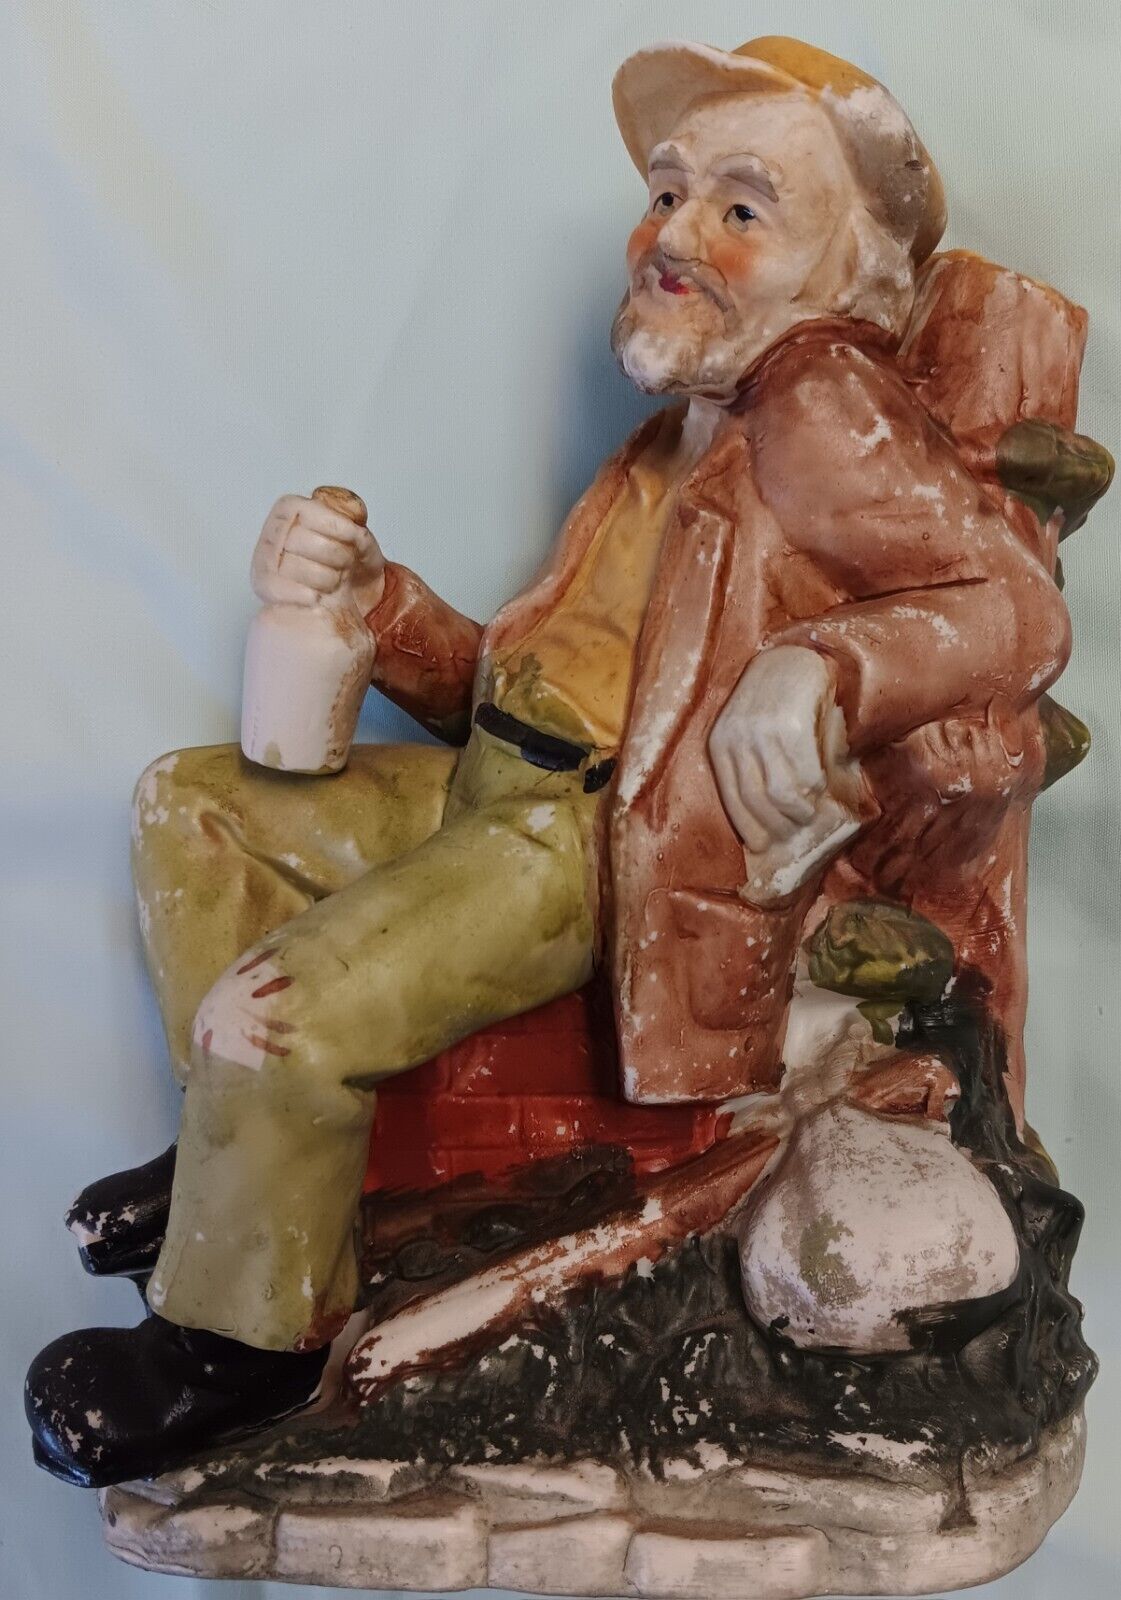 The Tired Old Man Vintage Ceramic Figurine / Statuette - Collector\'s Item  